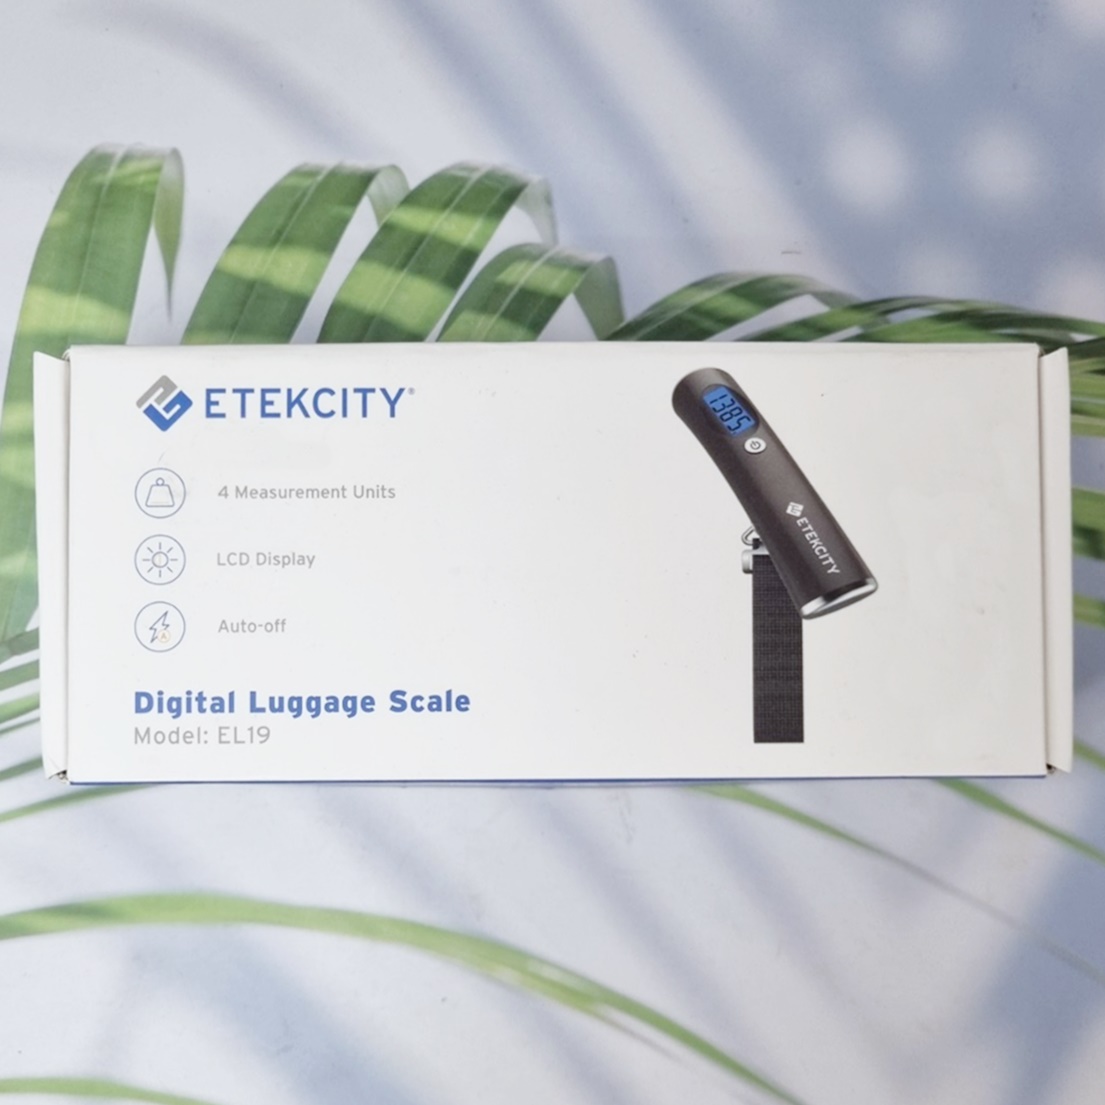 The One about the Etekcity Hanging Digital Luggage Scale (EL19